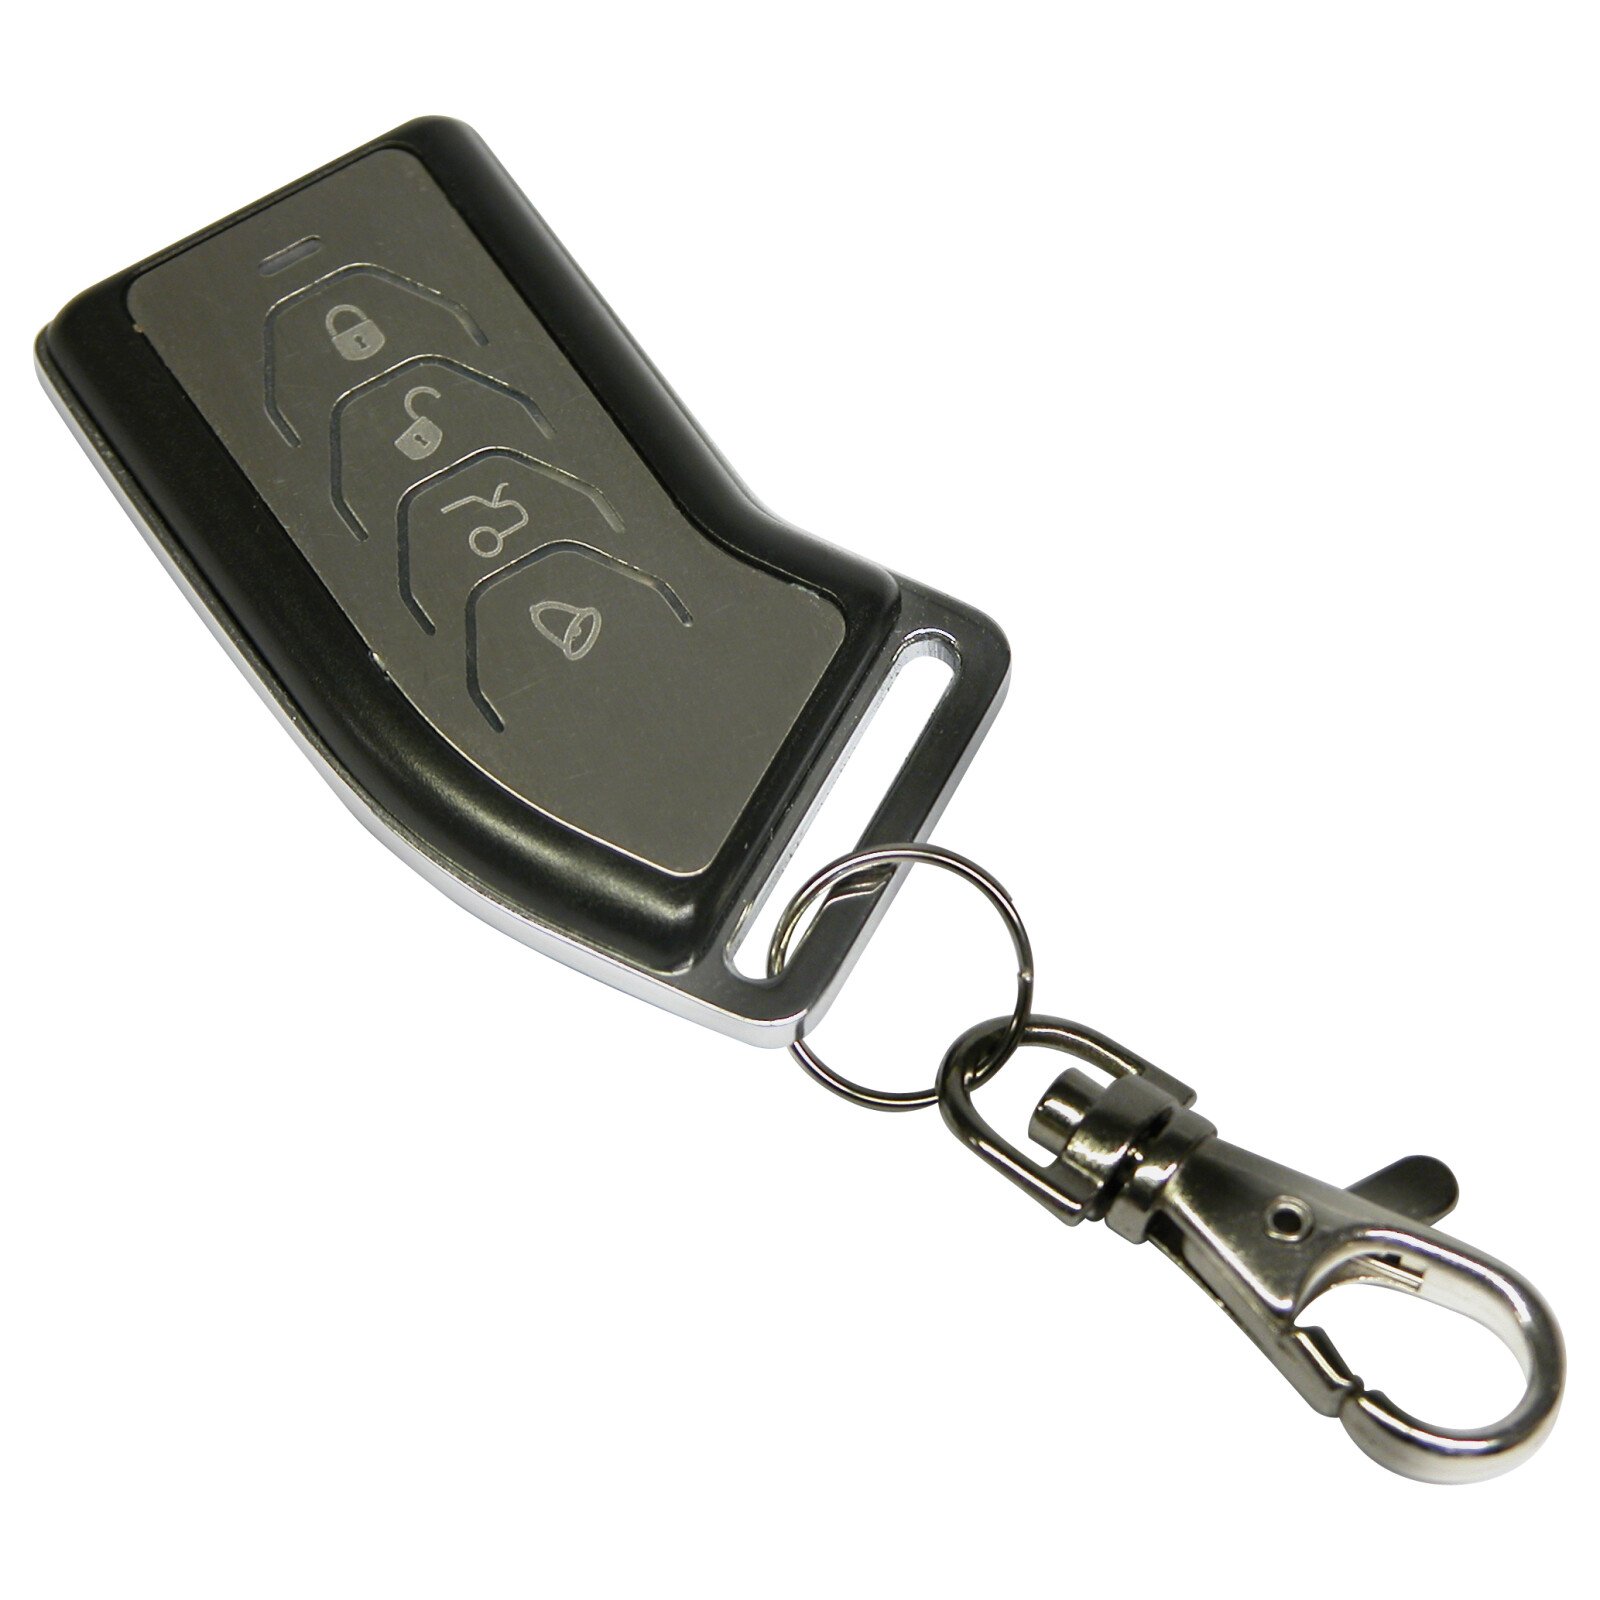 Keyless entry system with remote control 12V - LT051 thumb